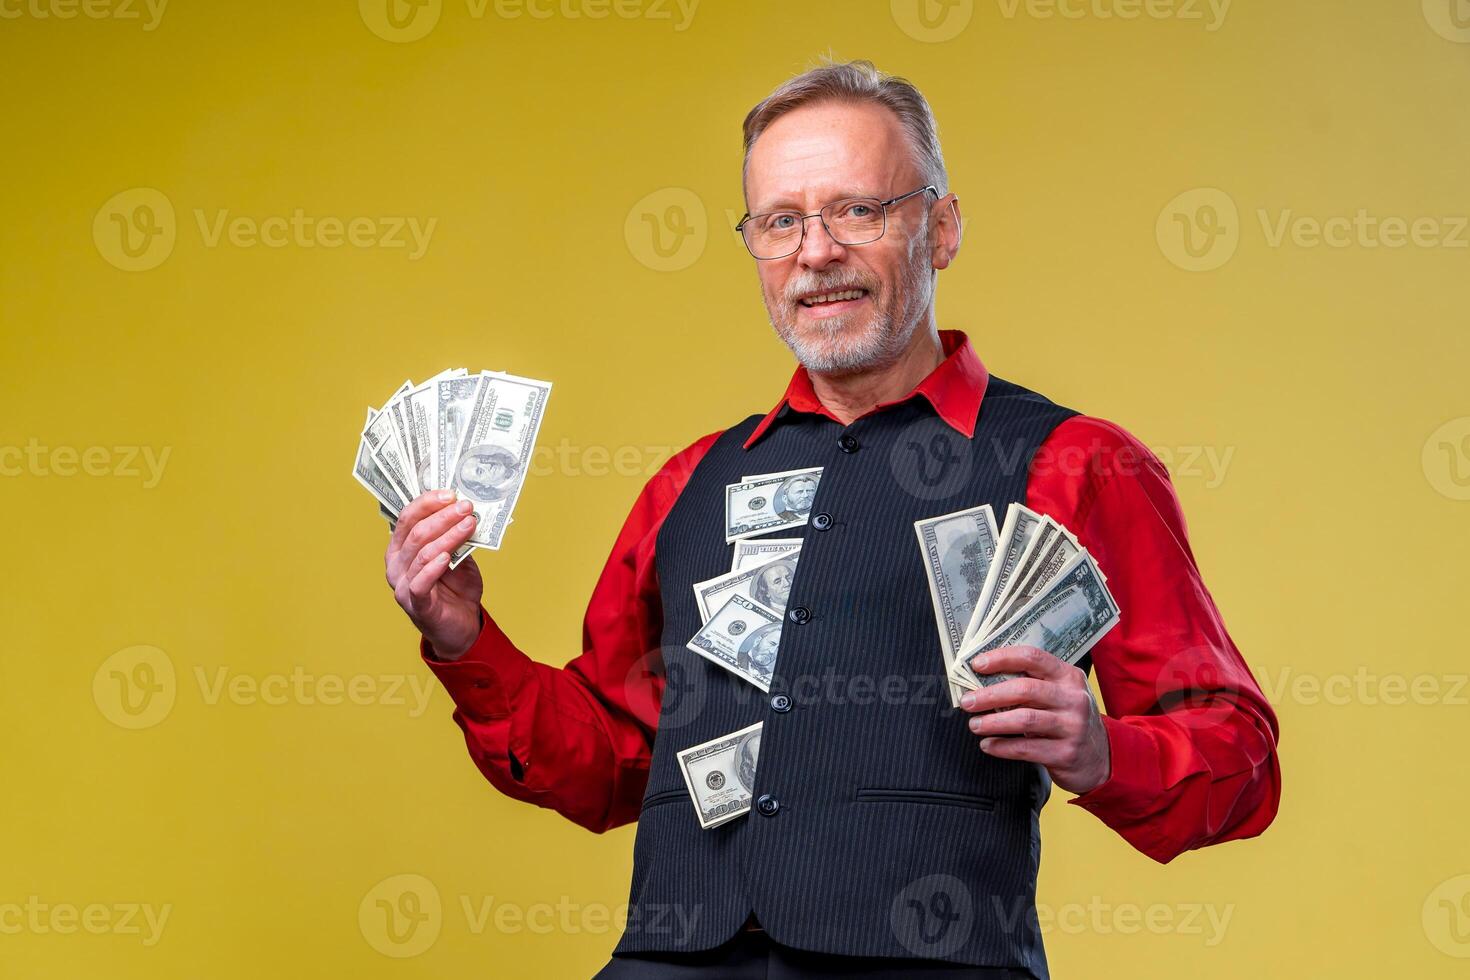 Portrait of happy and white teeth smile senior old business man holding money in hands, dressed in red shirt, isolated on yellow background. Human emotions and facial expressions photo